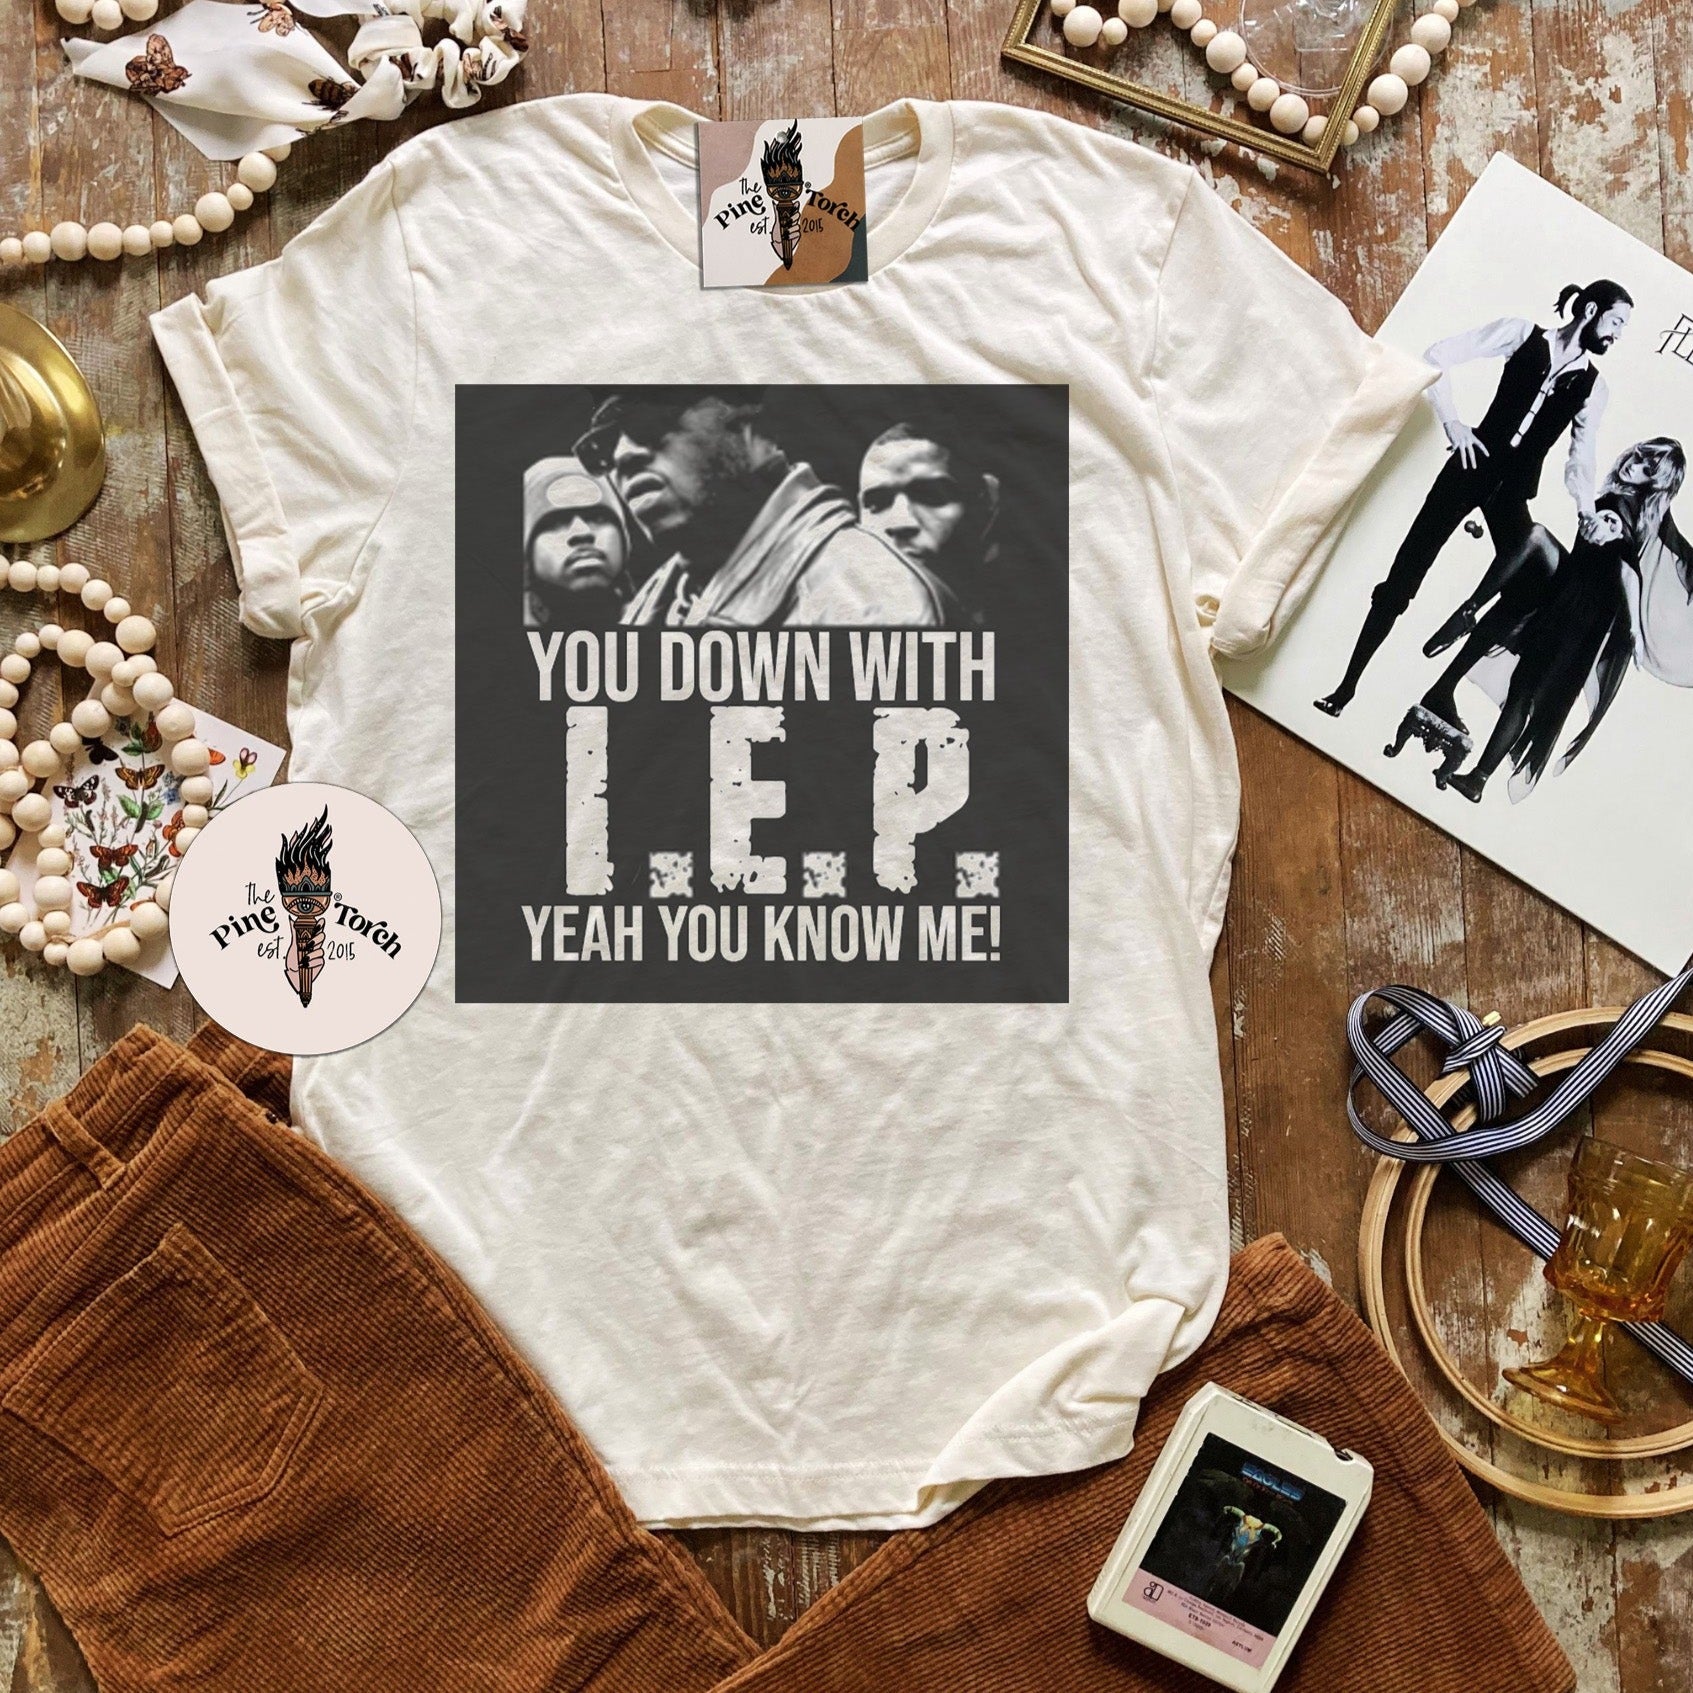 « YOU DOWN WITH IEP? YEAH YOU KNOW ME » UNISEX TEE